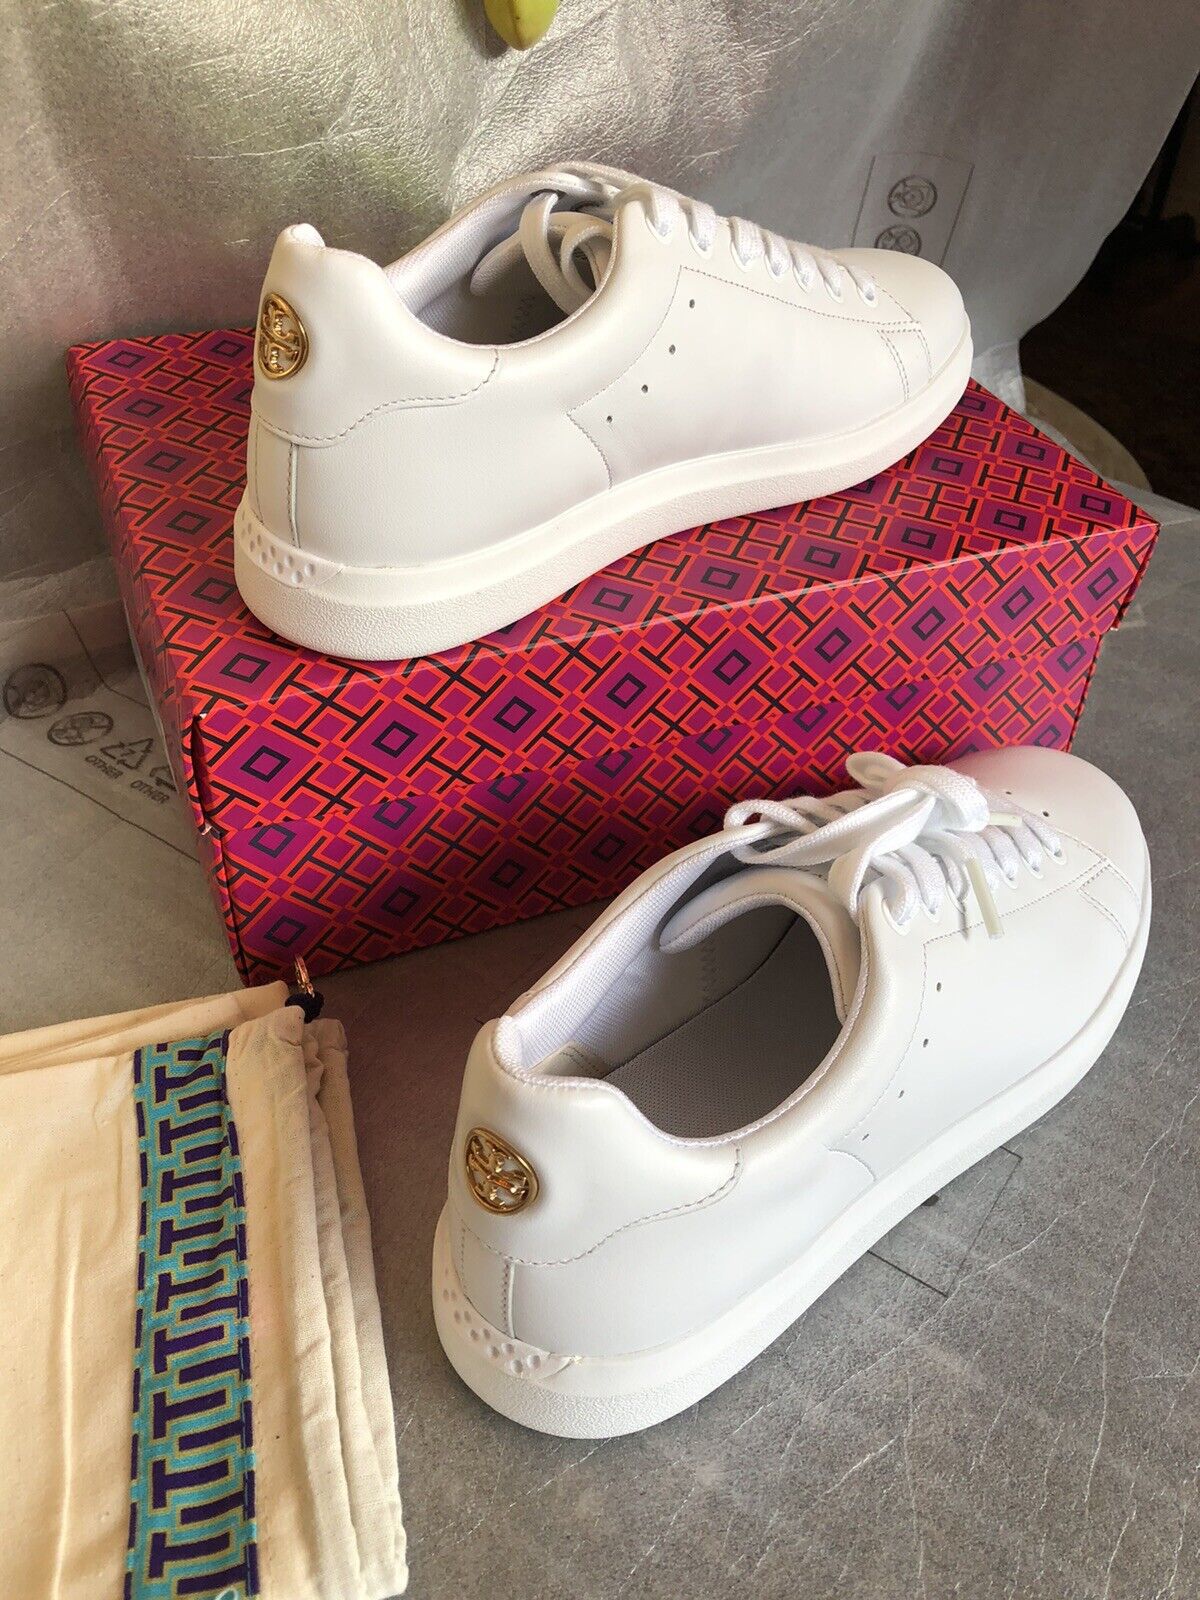 Tory Burch 'Howell Court Valley Forge' Low Top Sneakers Titanium White US  6,5 M 192485452167 | eBay